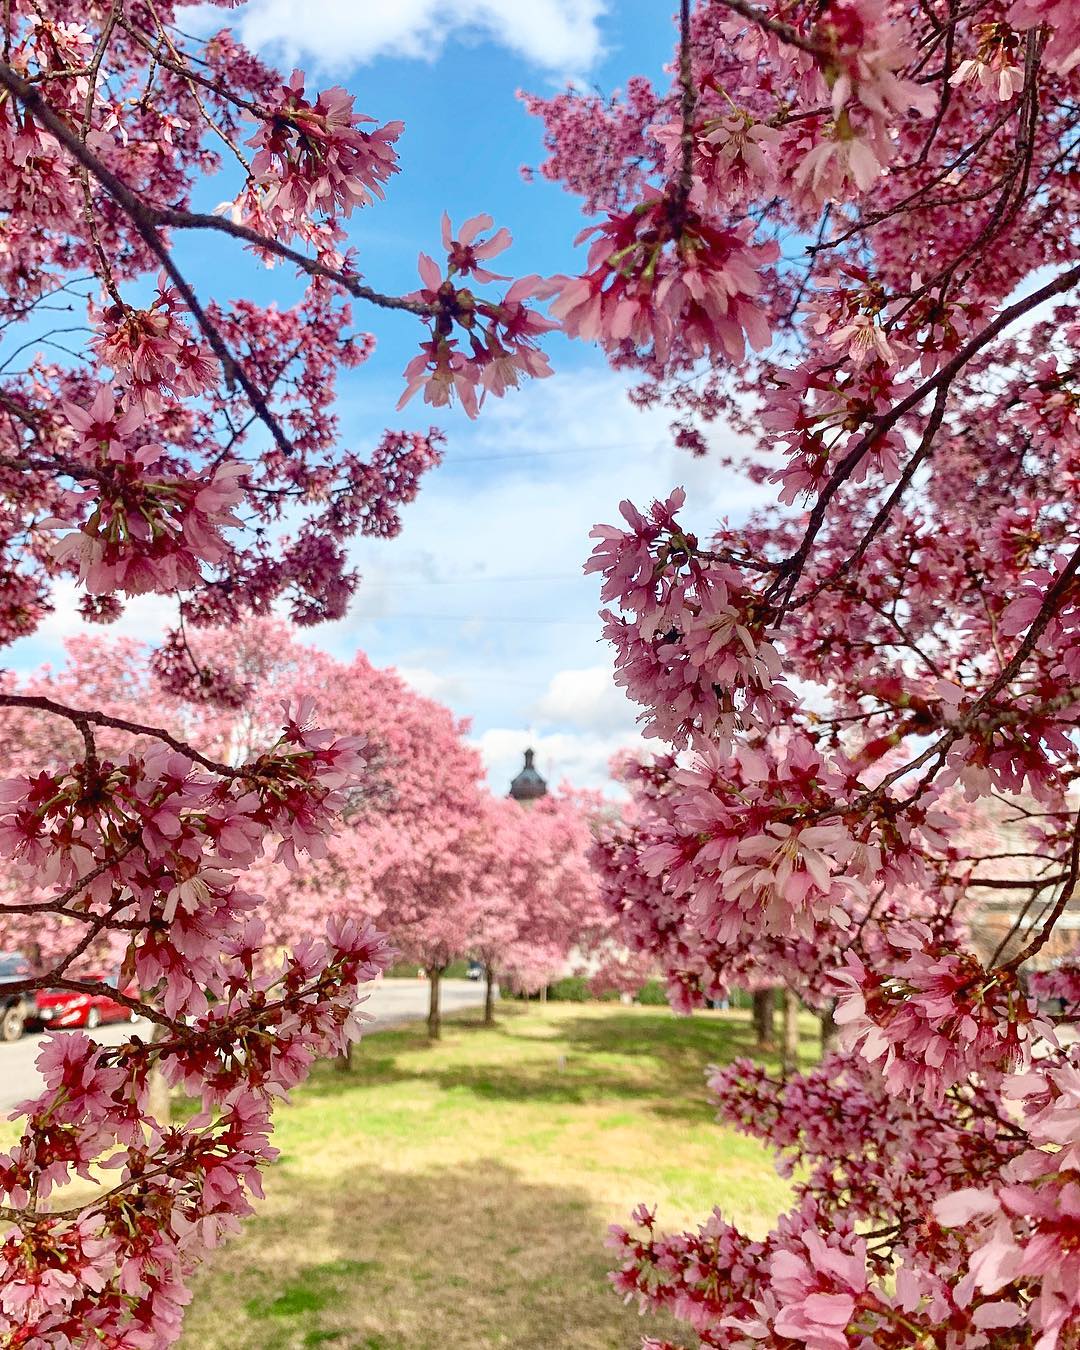 Close up of pink cherry blossom flowers. Photo by Instagram user @magscars